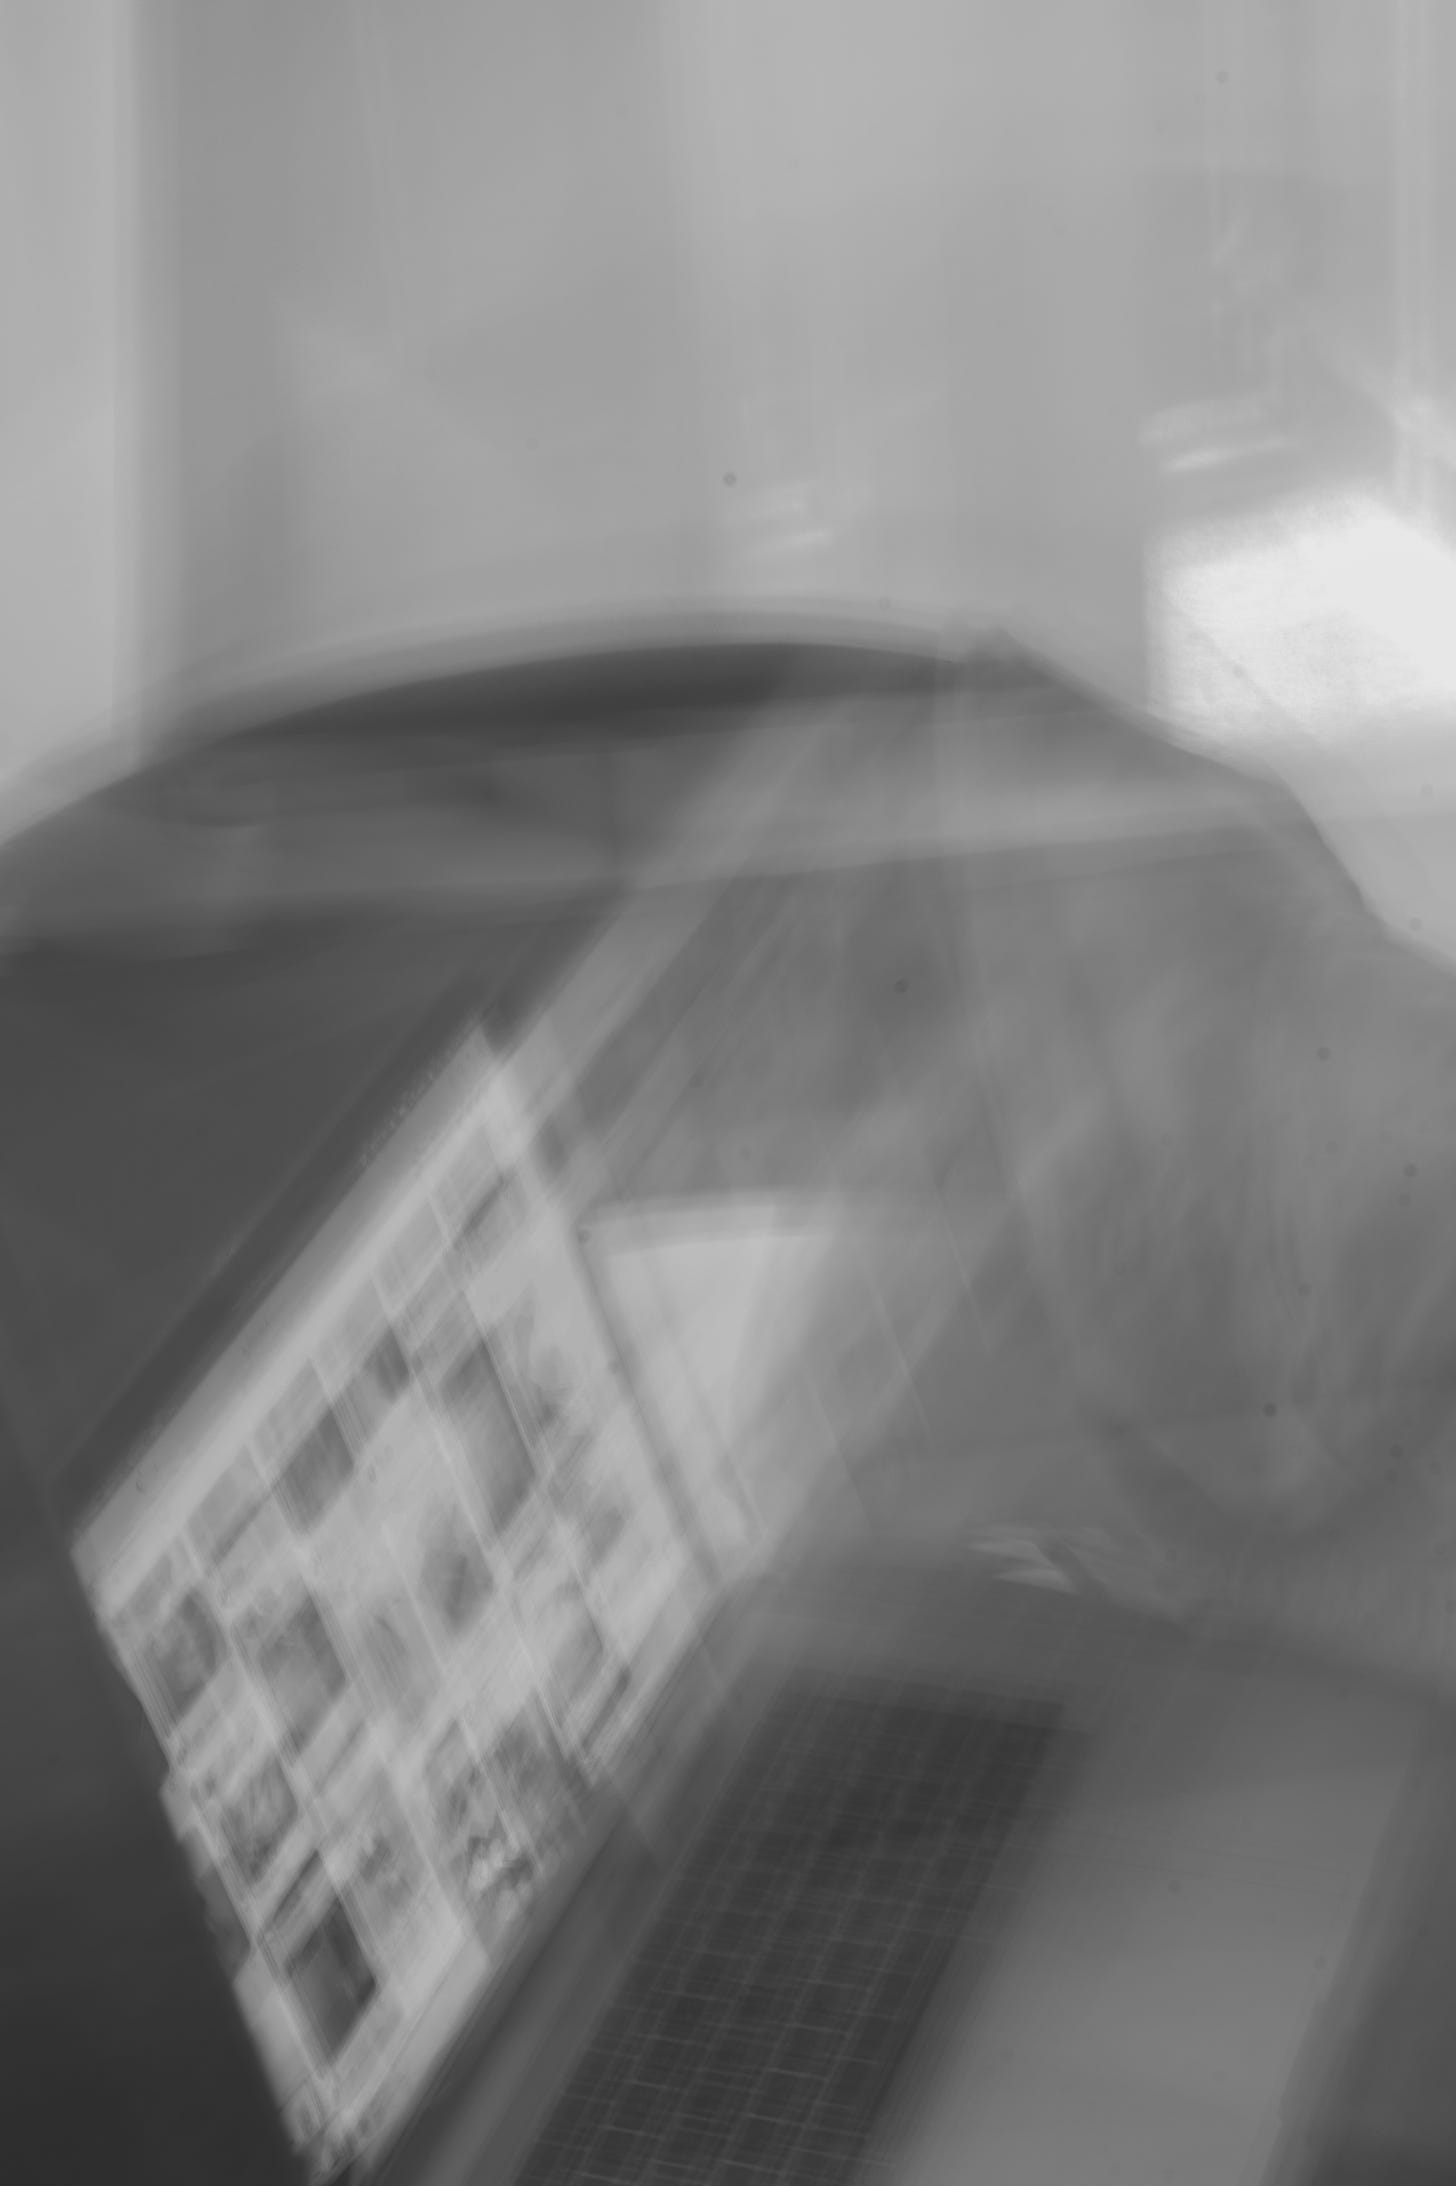 blurry b&w image of laptop on a bed